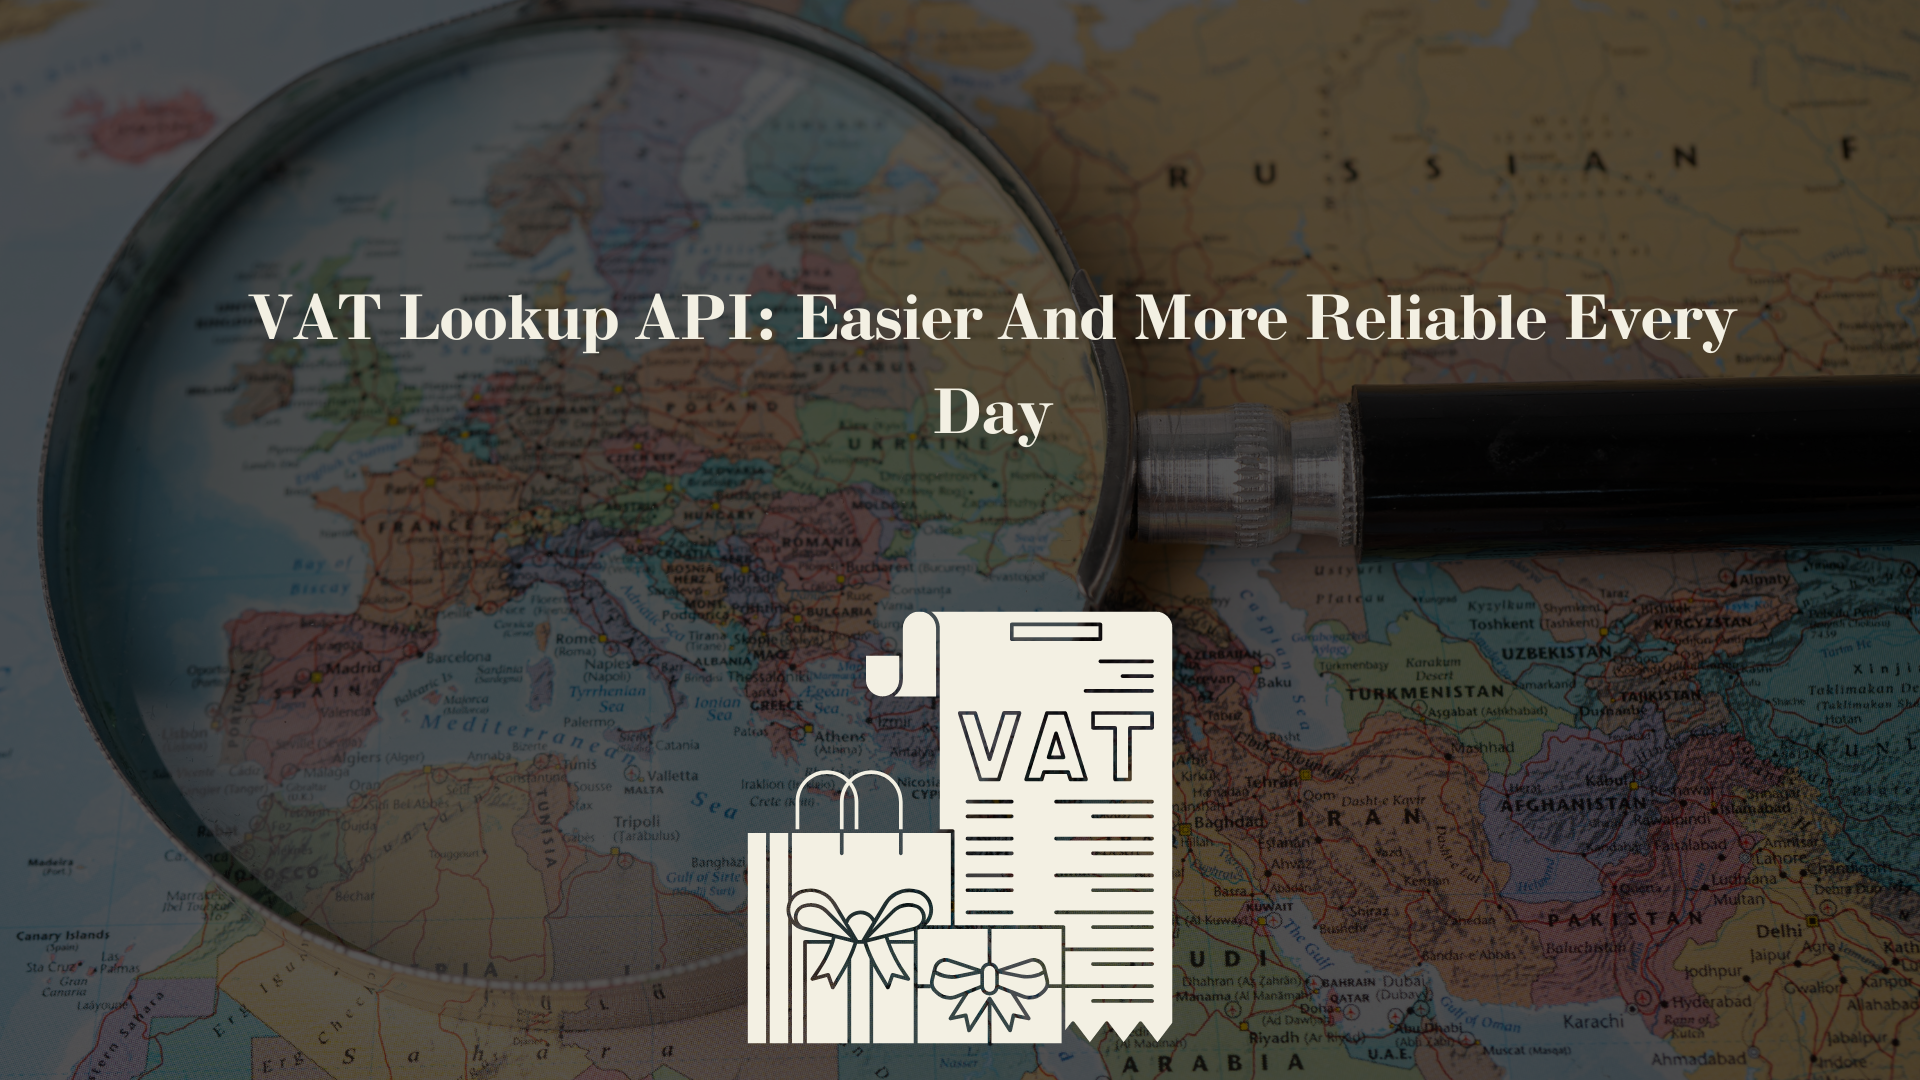 VAT Lookup API: Easier And More Reliable Every Day